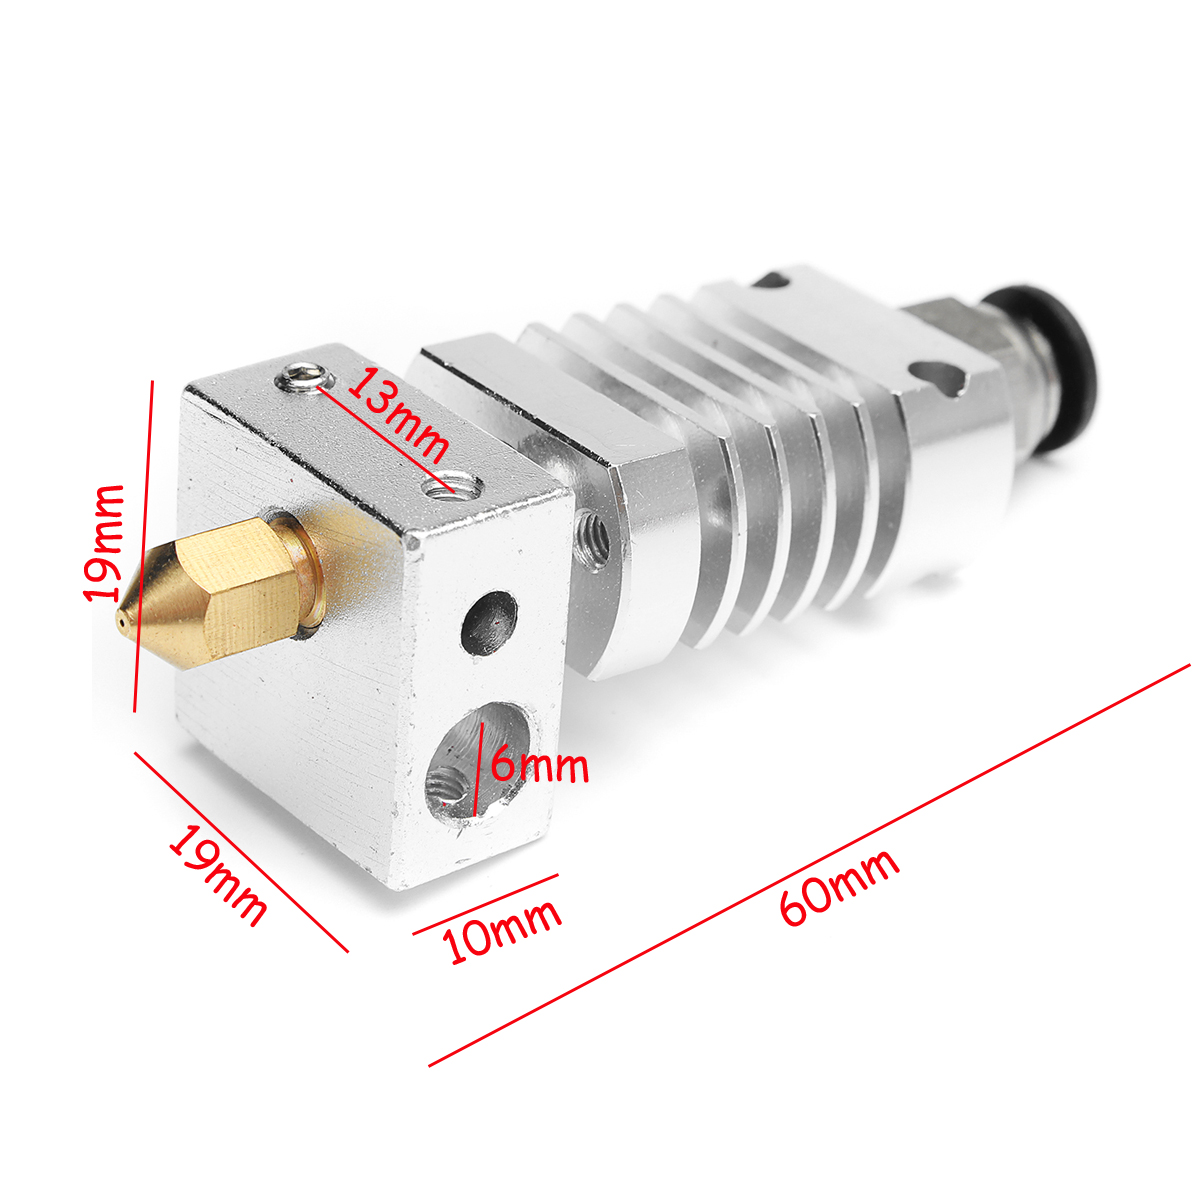 V6 1.75mm All Metal J-Head Hotend Remote Extruder Kit with Heating tube for CR10 3D Printer 10